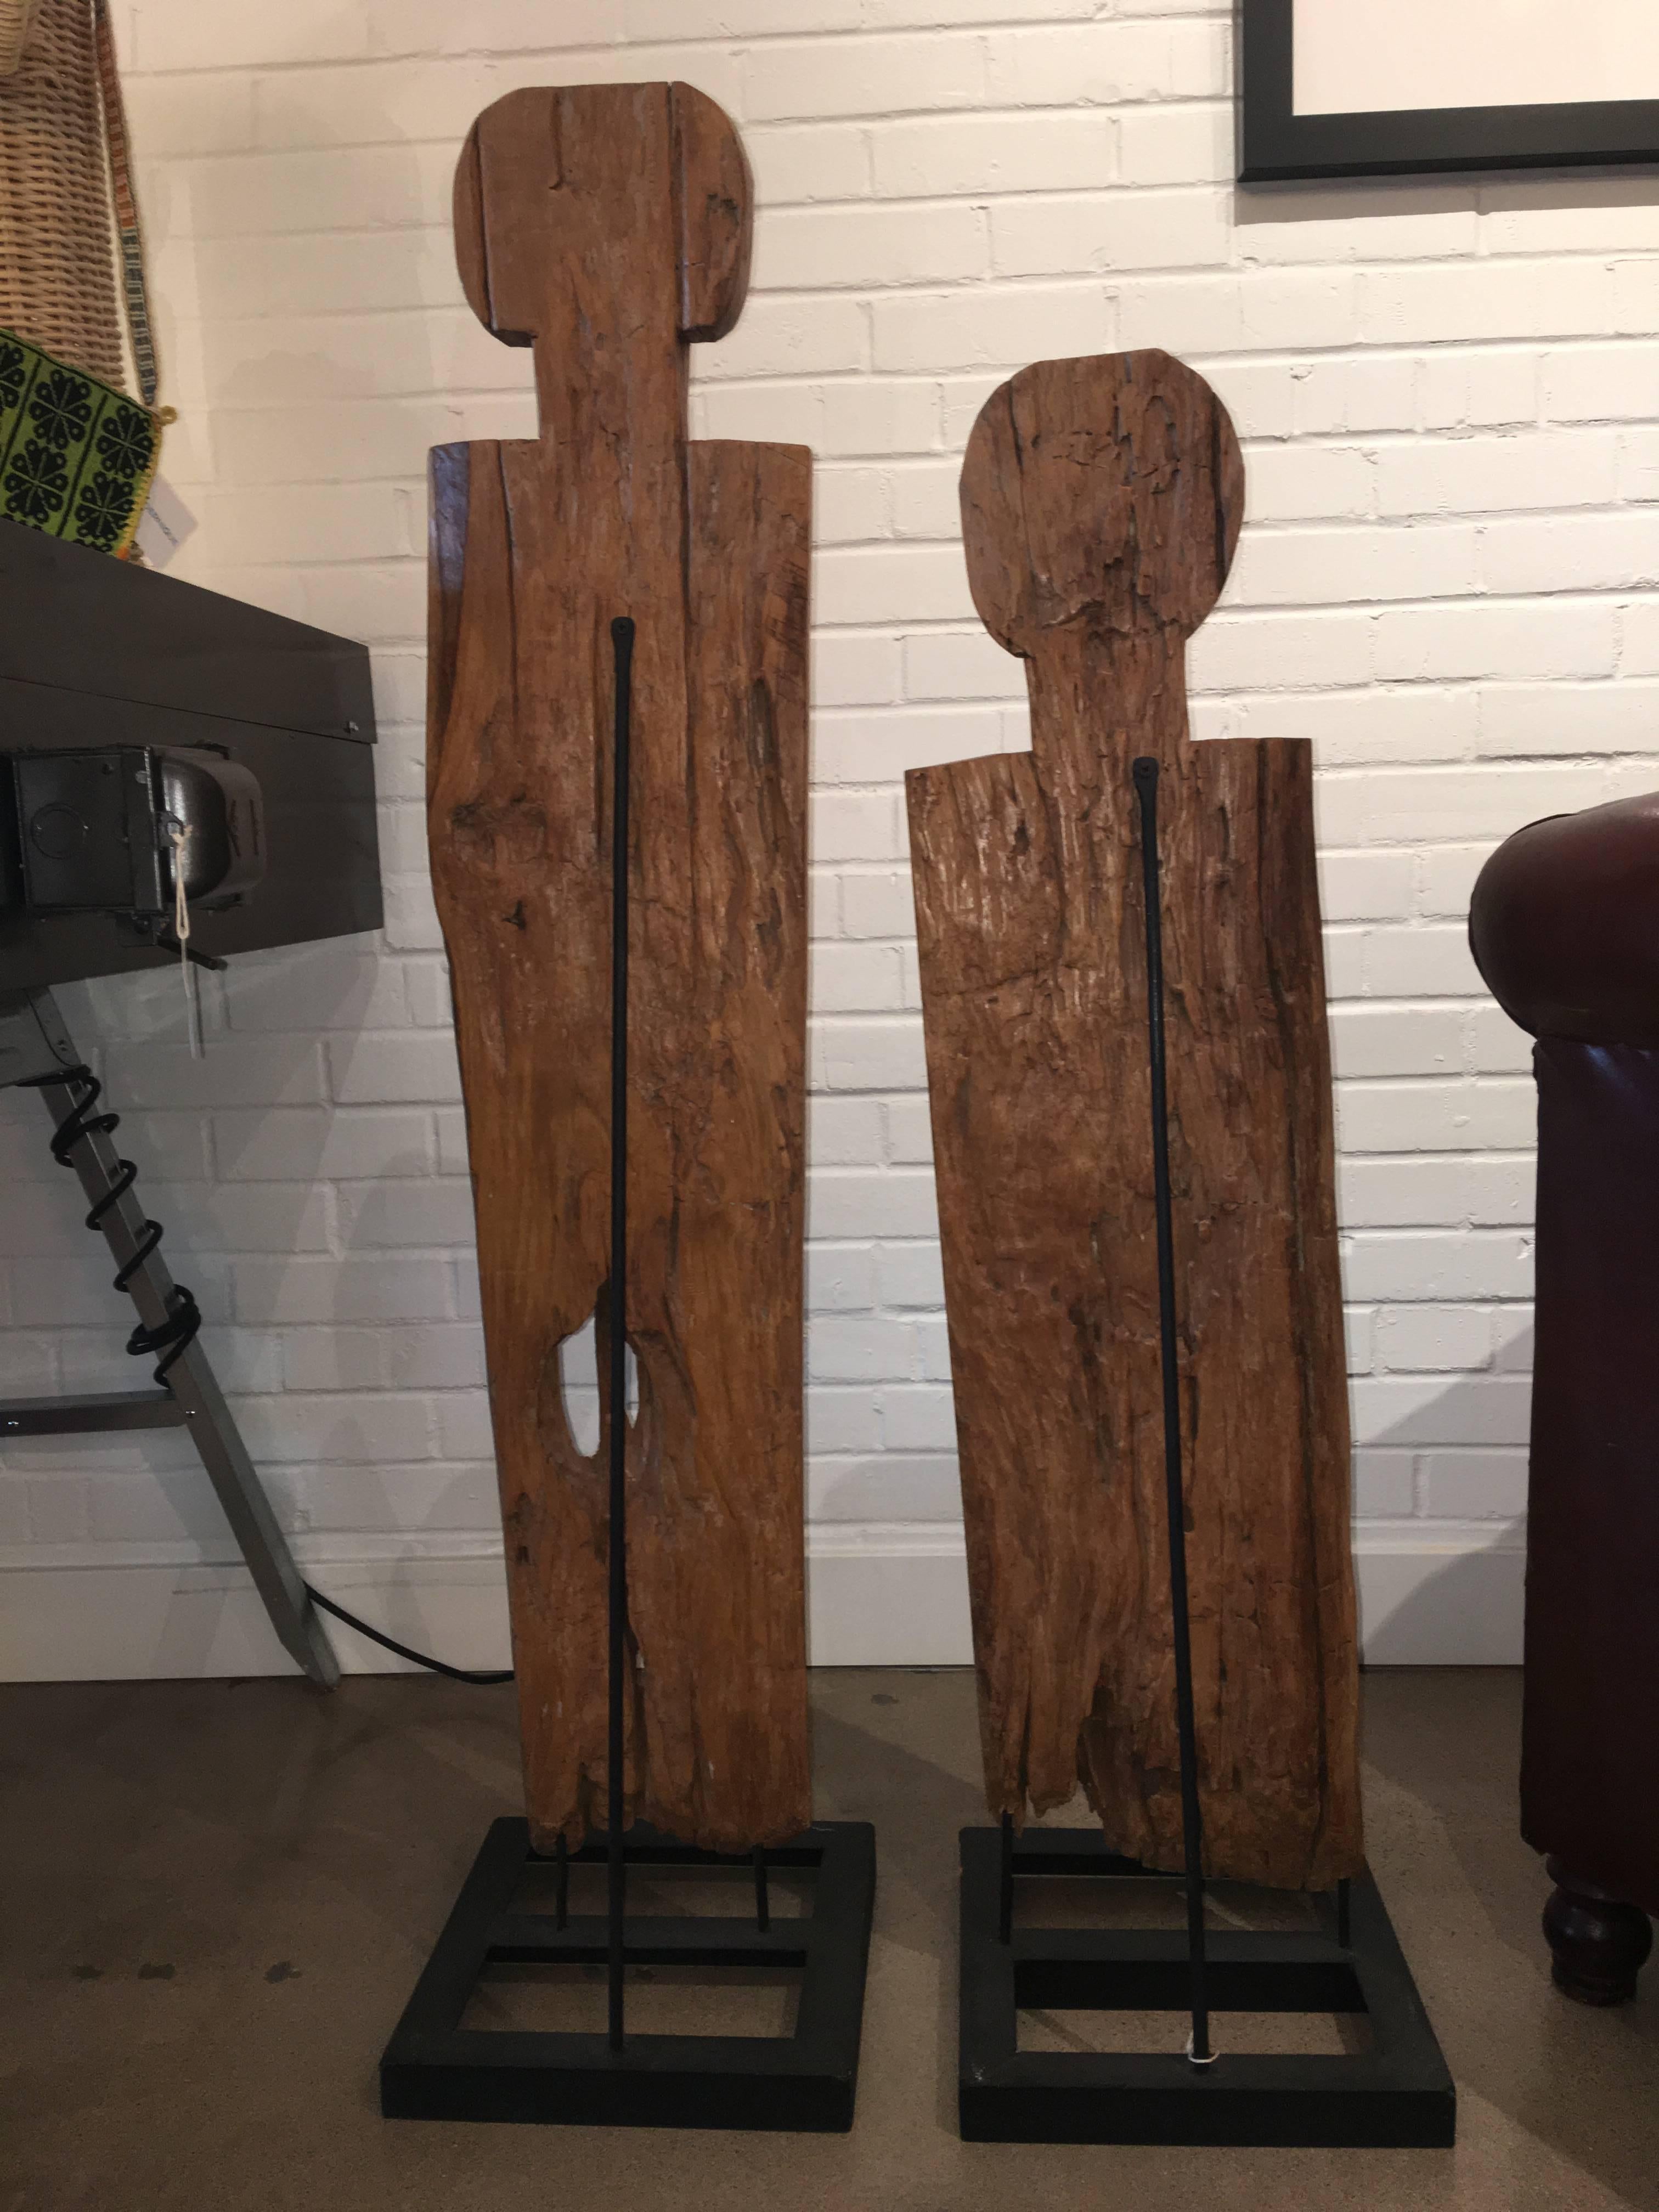 Pair of happy, smiling midcentury wooden man and woman sculptures. Sold separately but wonderful as a pair. Mounted on metal stands.
Dimensions:
Tall (Man) H 48.5